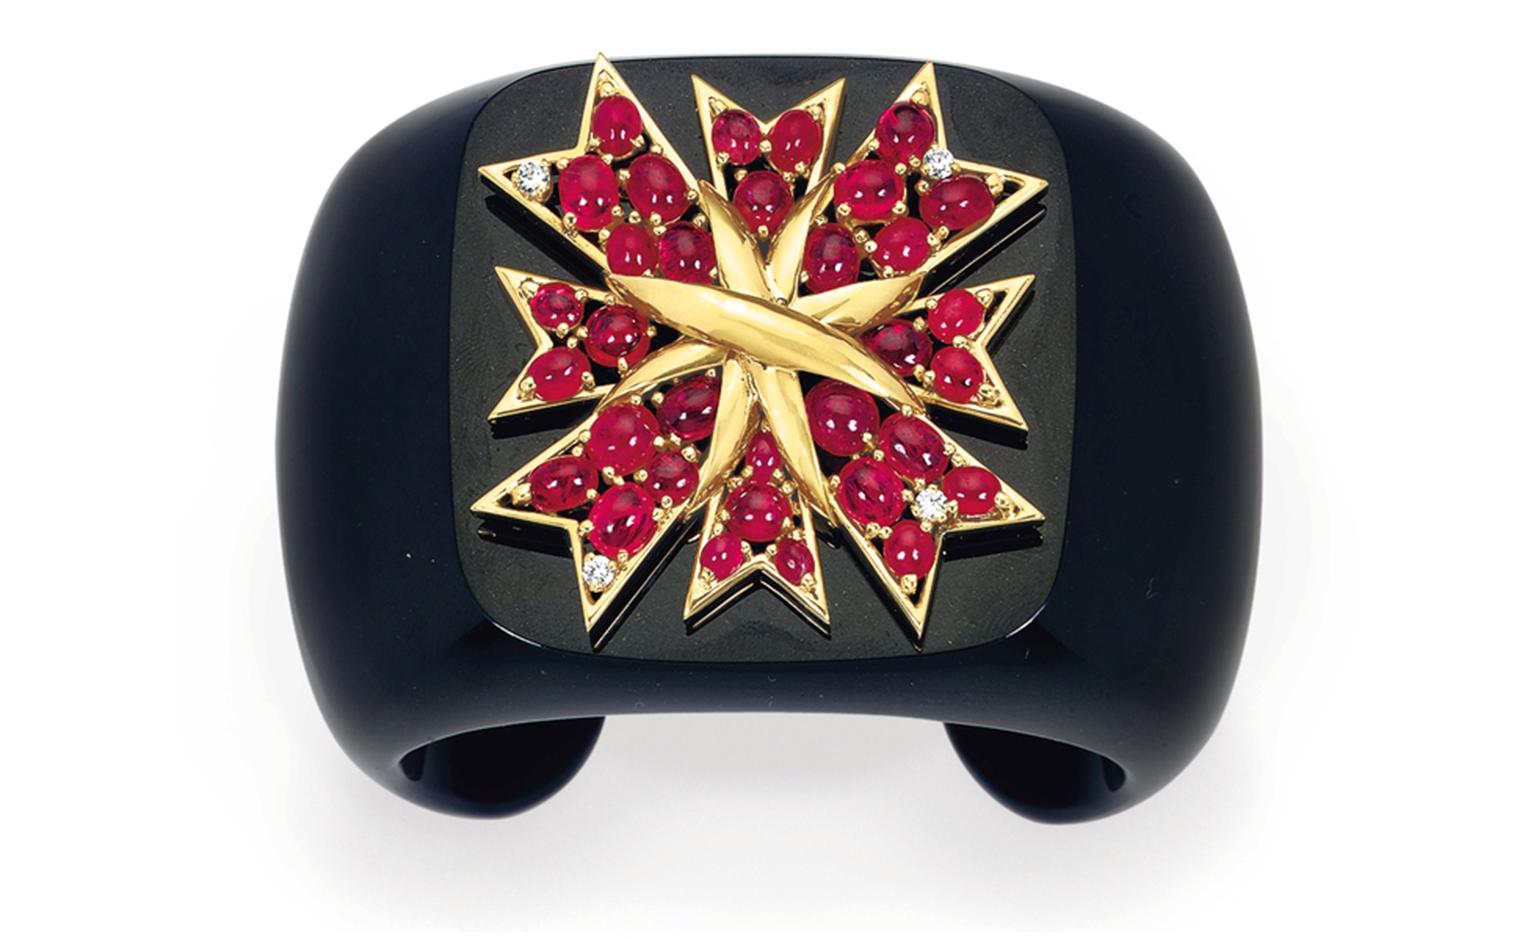 Lot 31. A diamond, ruby, onyx and gold cuff, by Verdura. Estimate 20,000 - 30,000 U.S. dollars. SOLD FOR $32,500